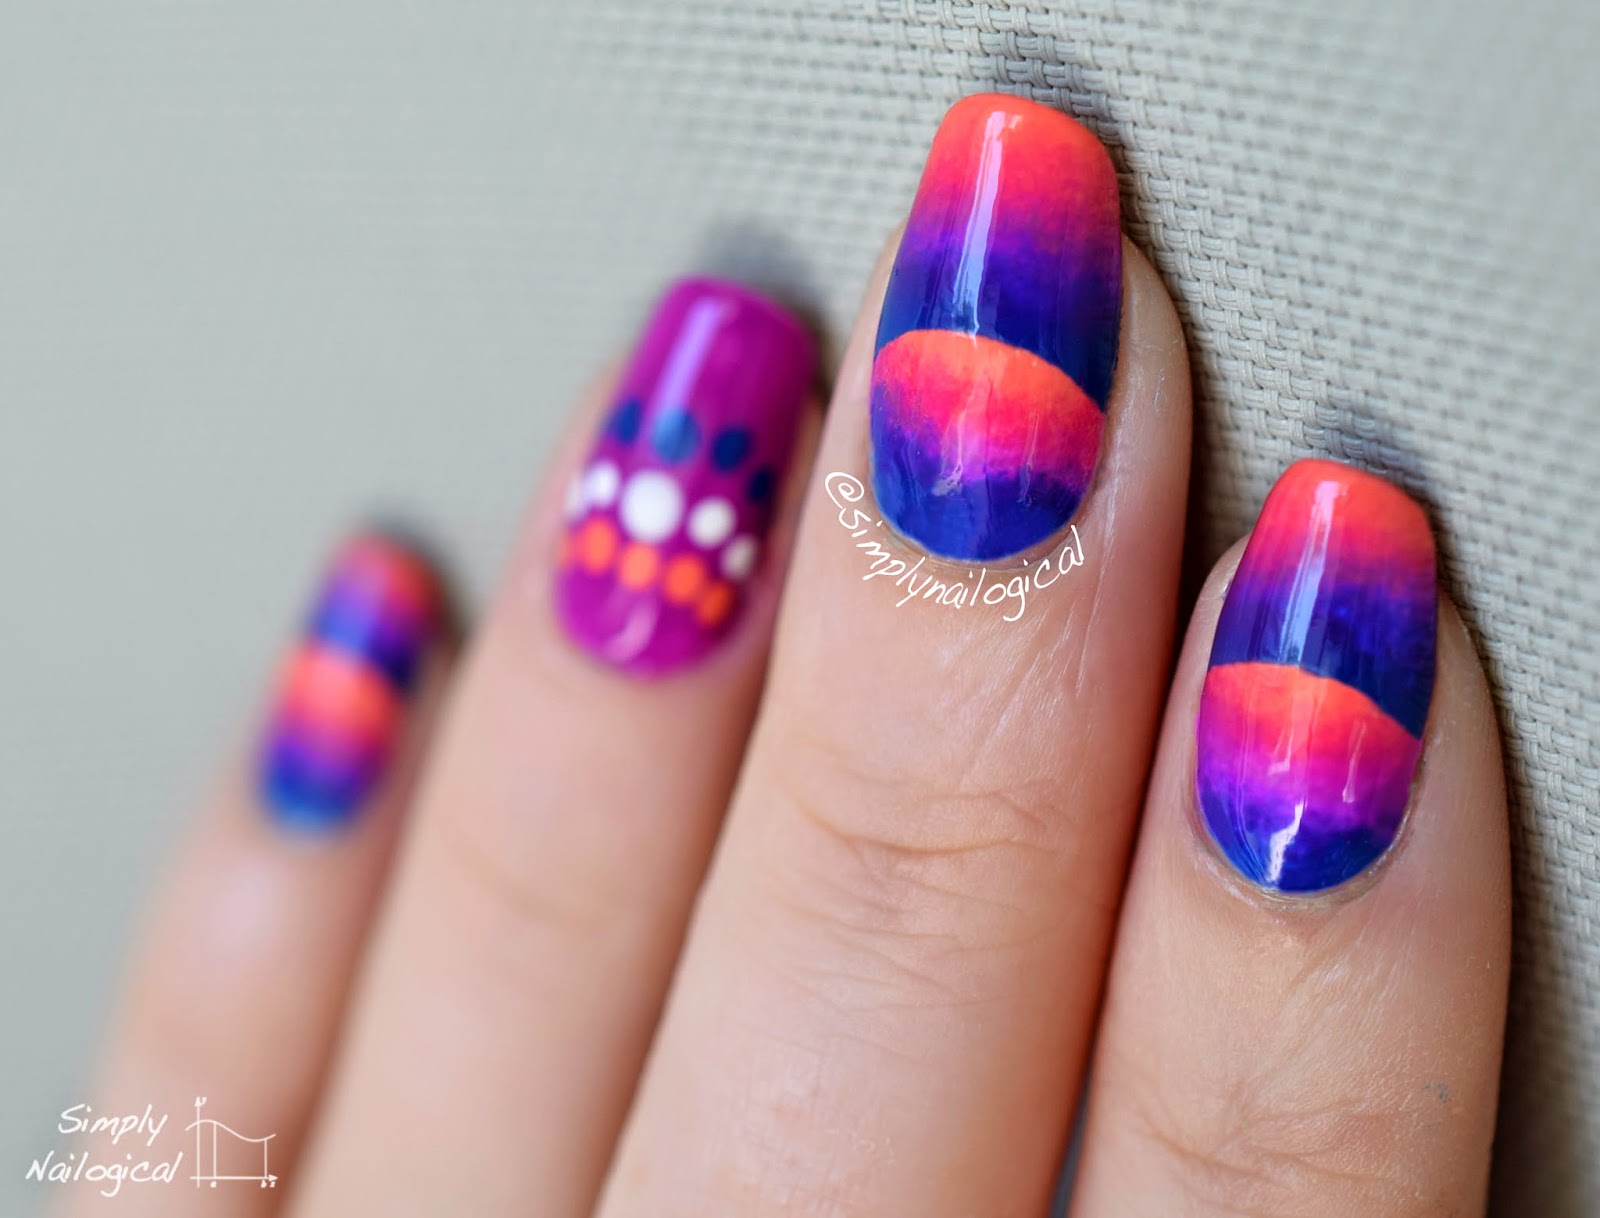 Guest post from Cristine from Simply Nailogical